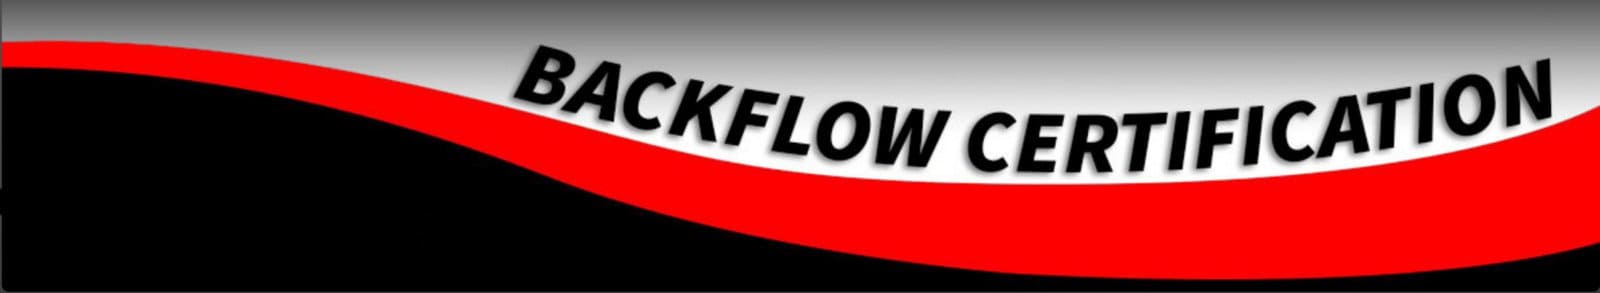 Backflow Prevention Services Broward County